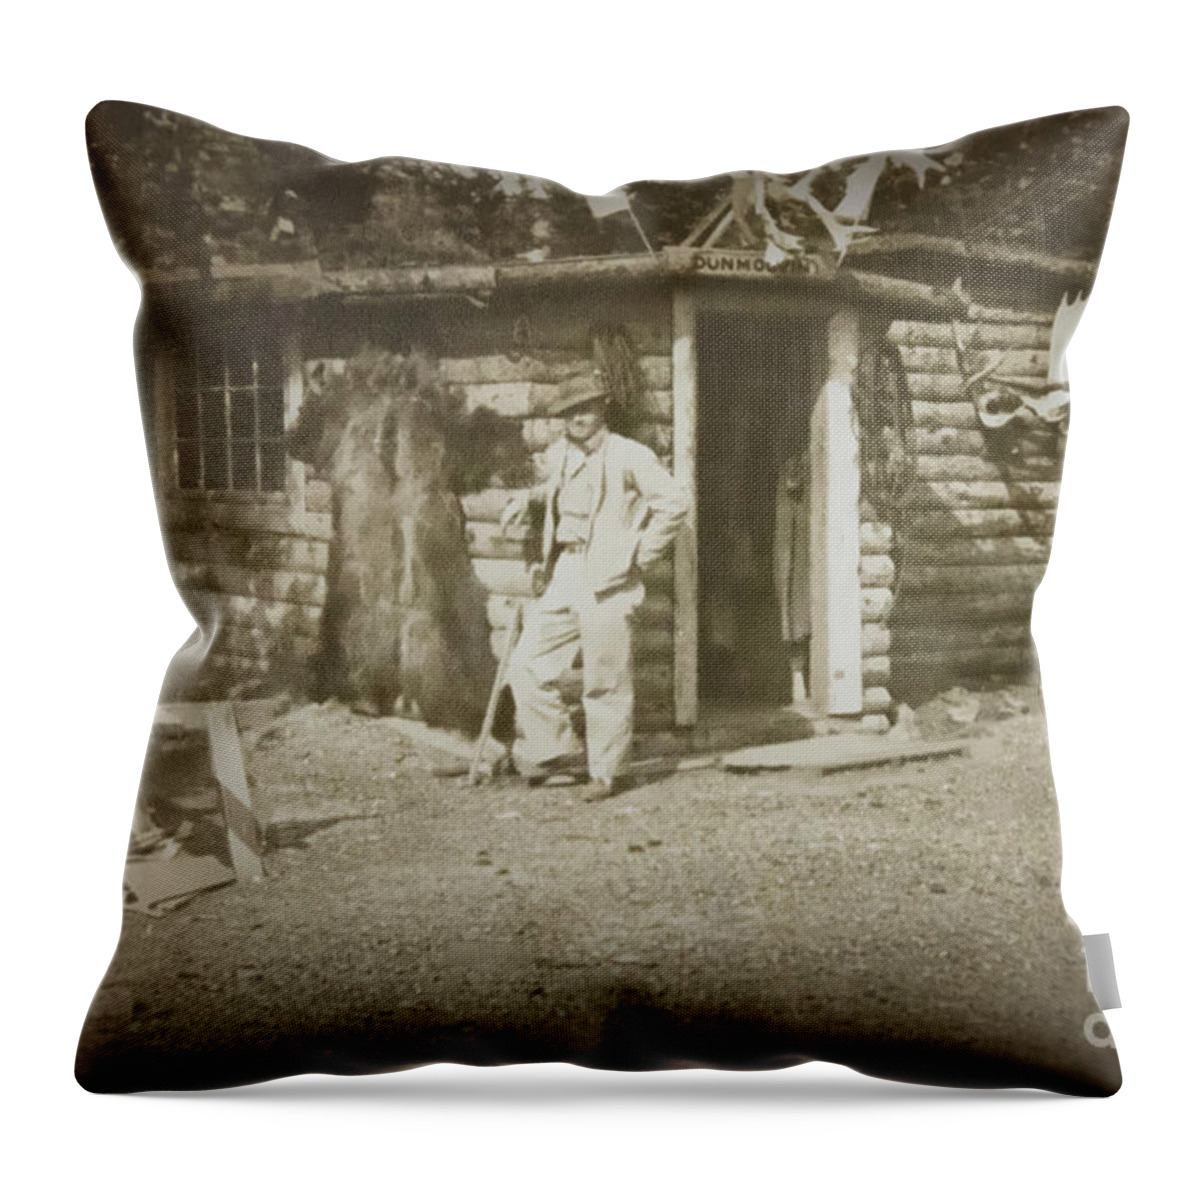 Architecture Throw Pillow featuring the photograph Vintage Log Cabin by Linda Phelps